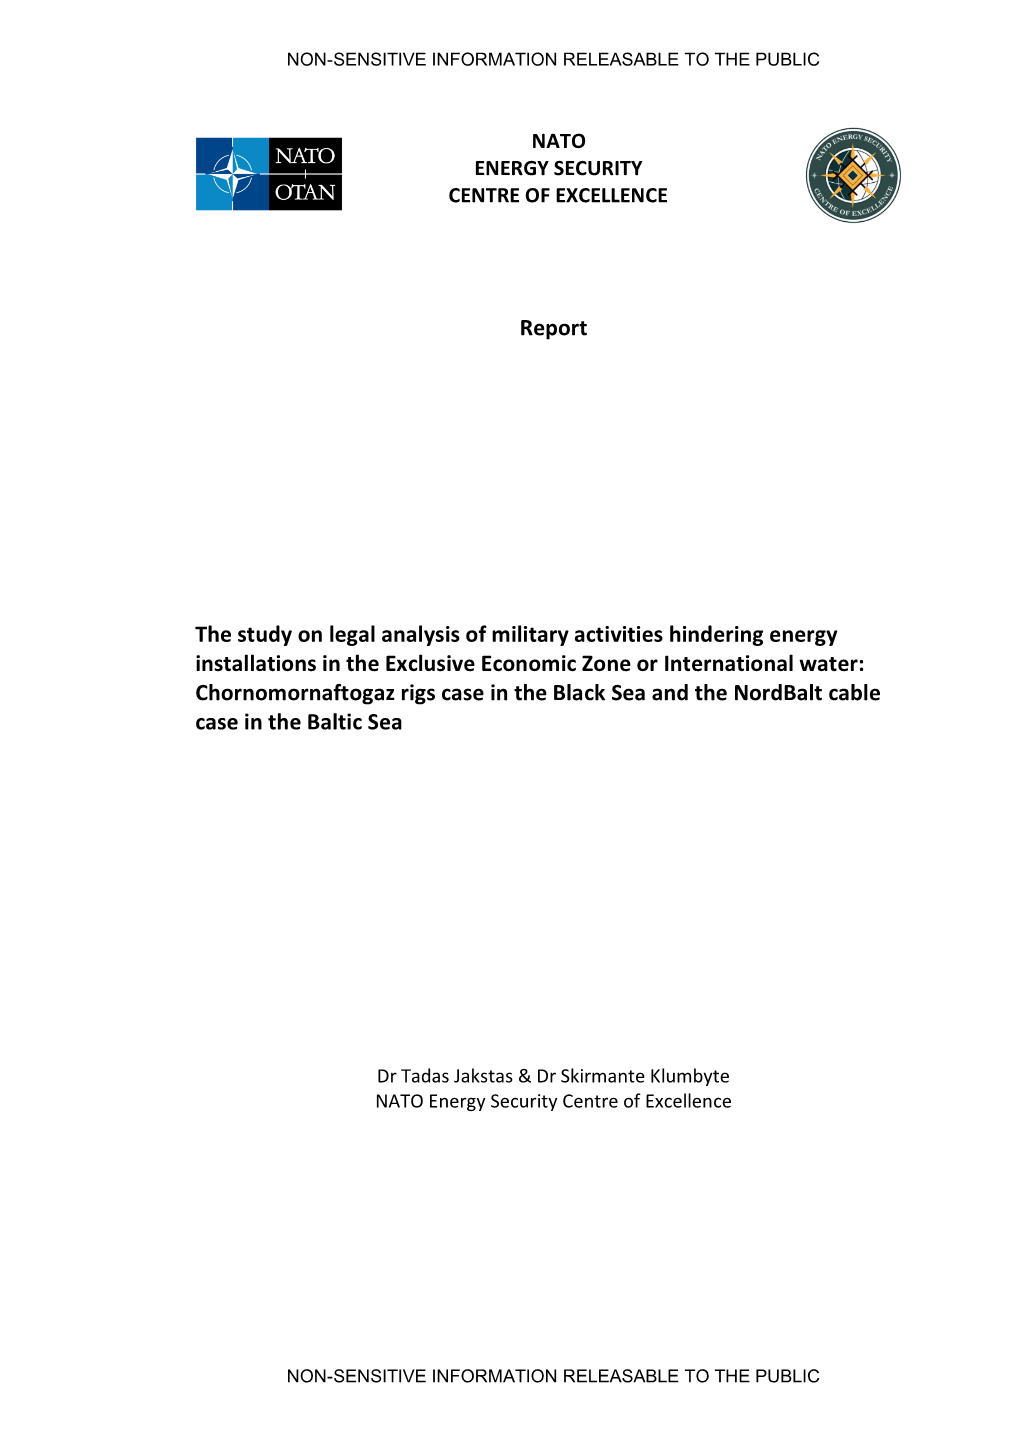 Report the Study on Legal Analysis of Military Activities Hindering Energy